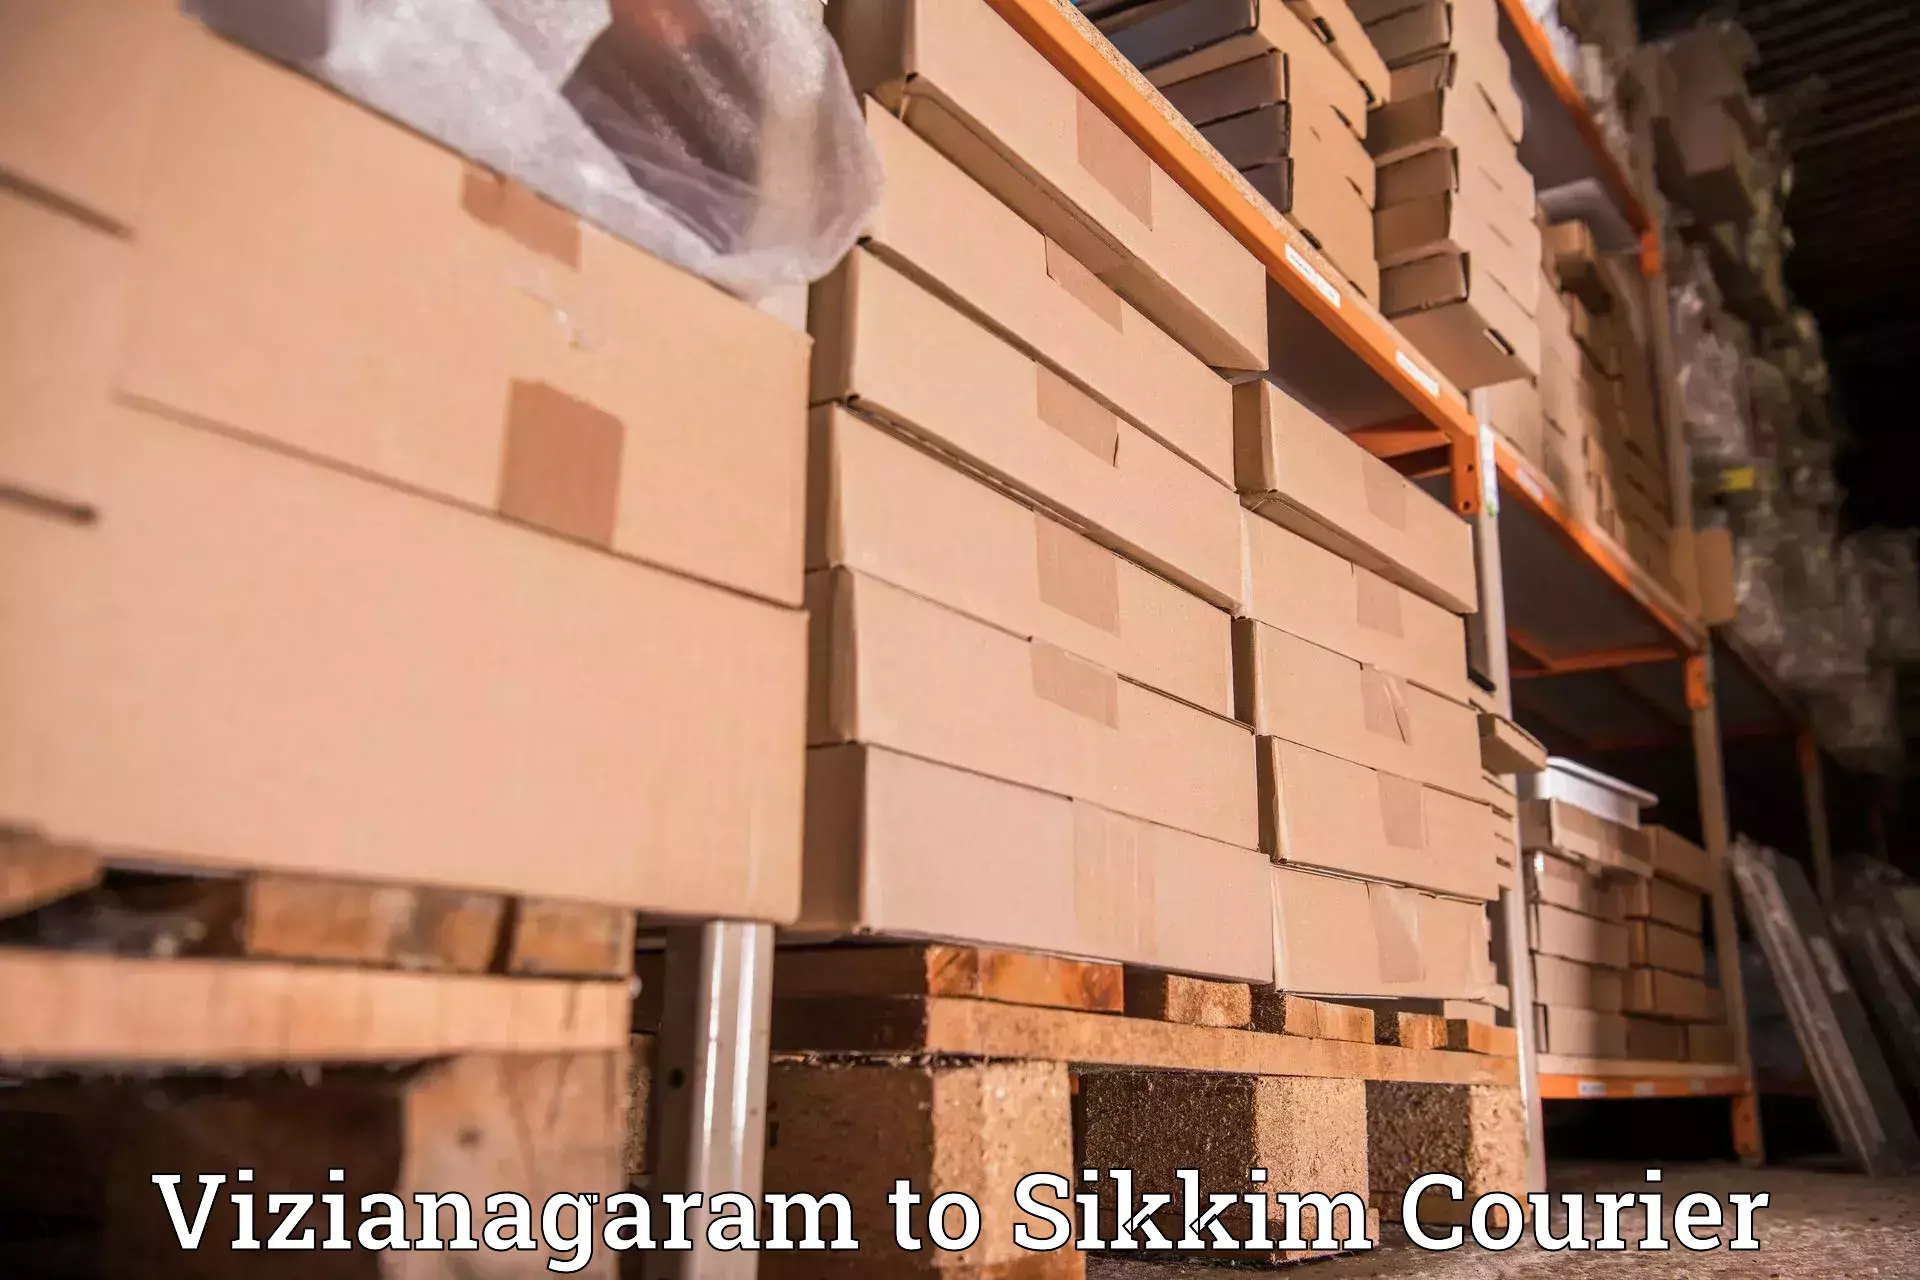 Reliable delivery network Vizianagaram to North Sikkim